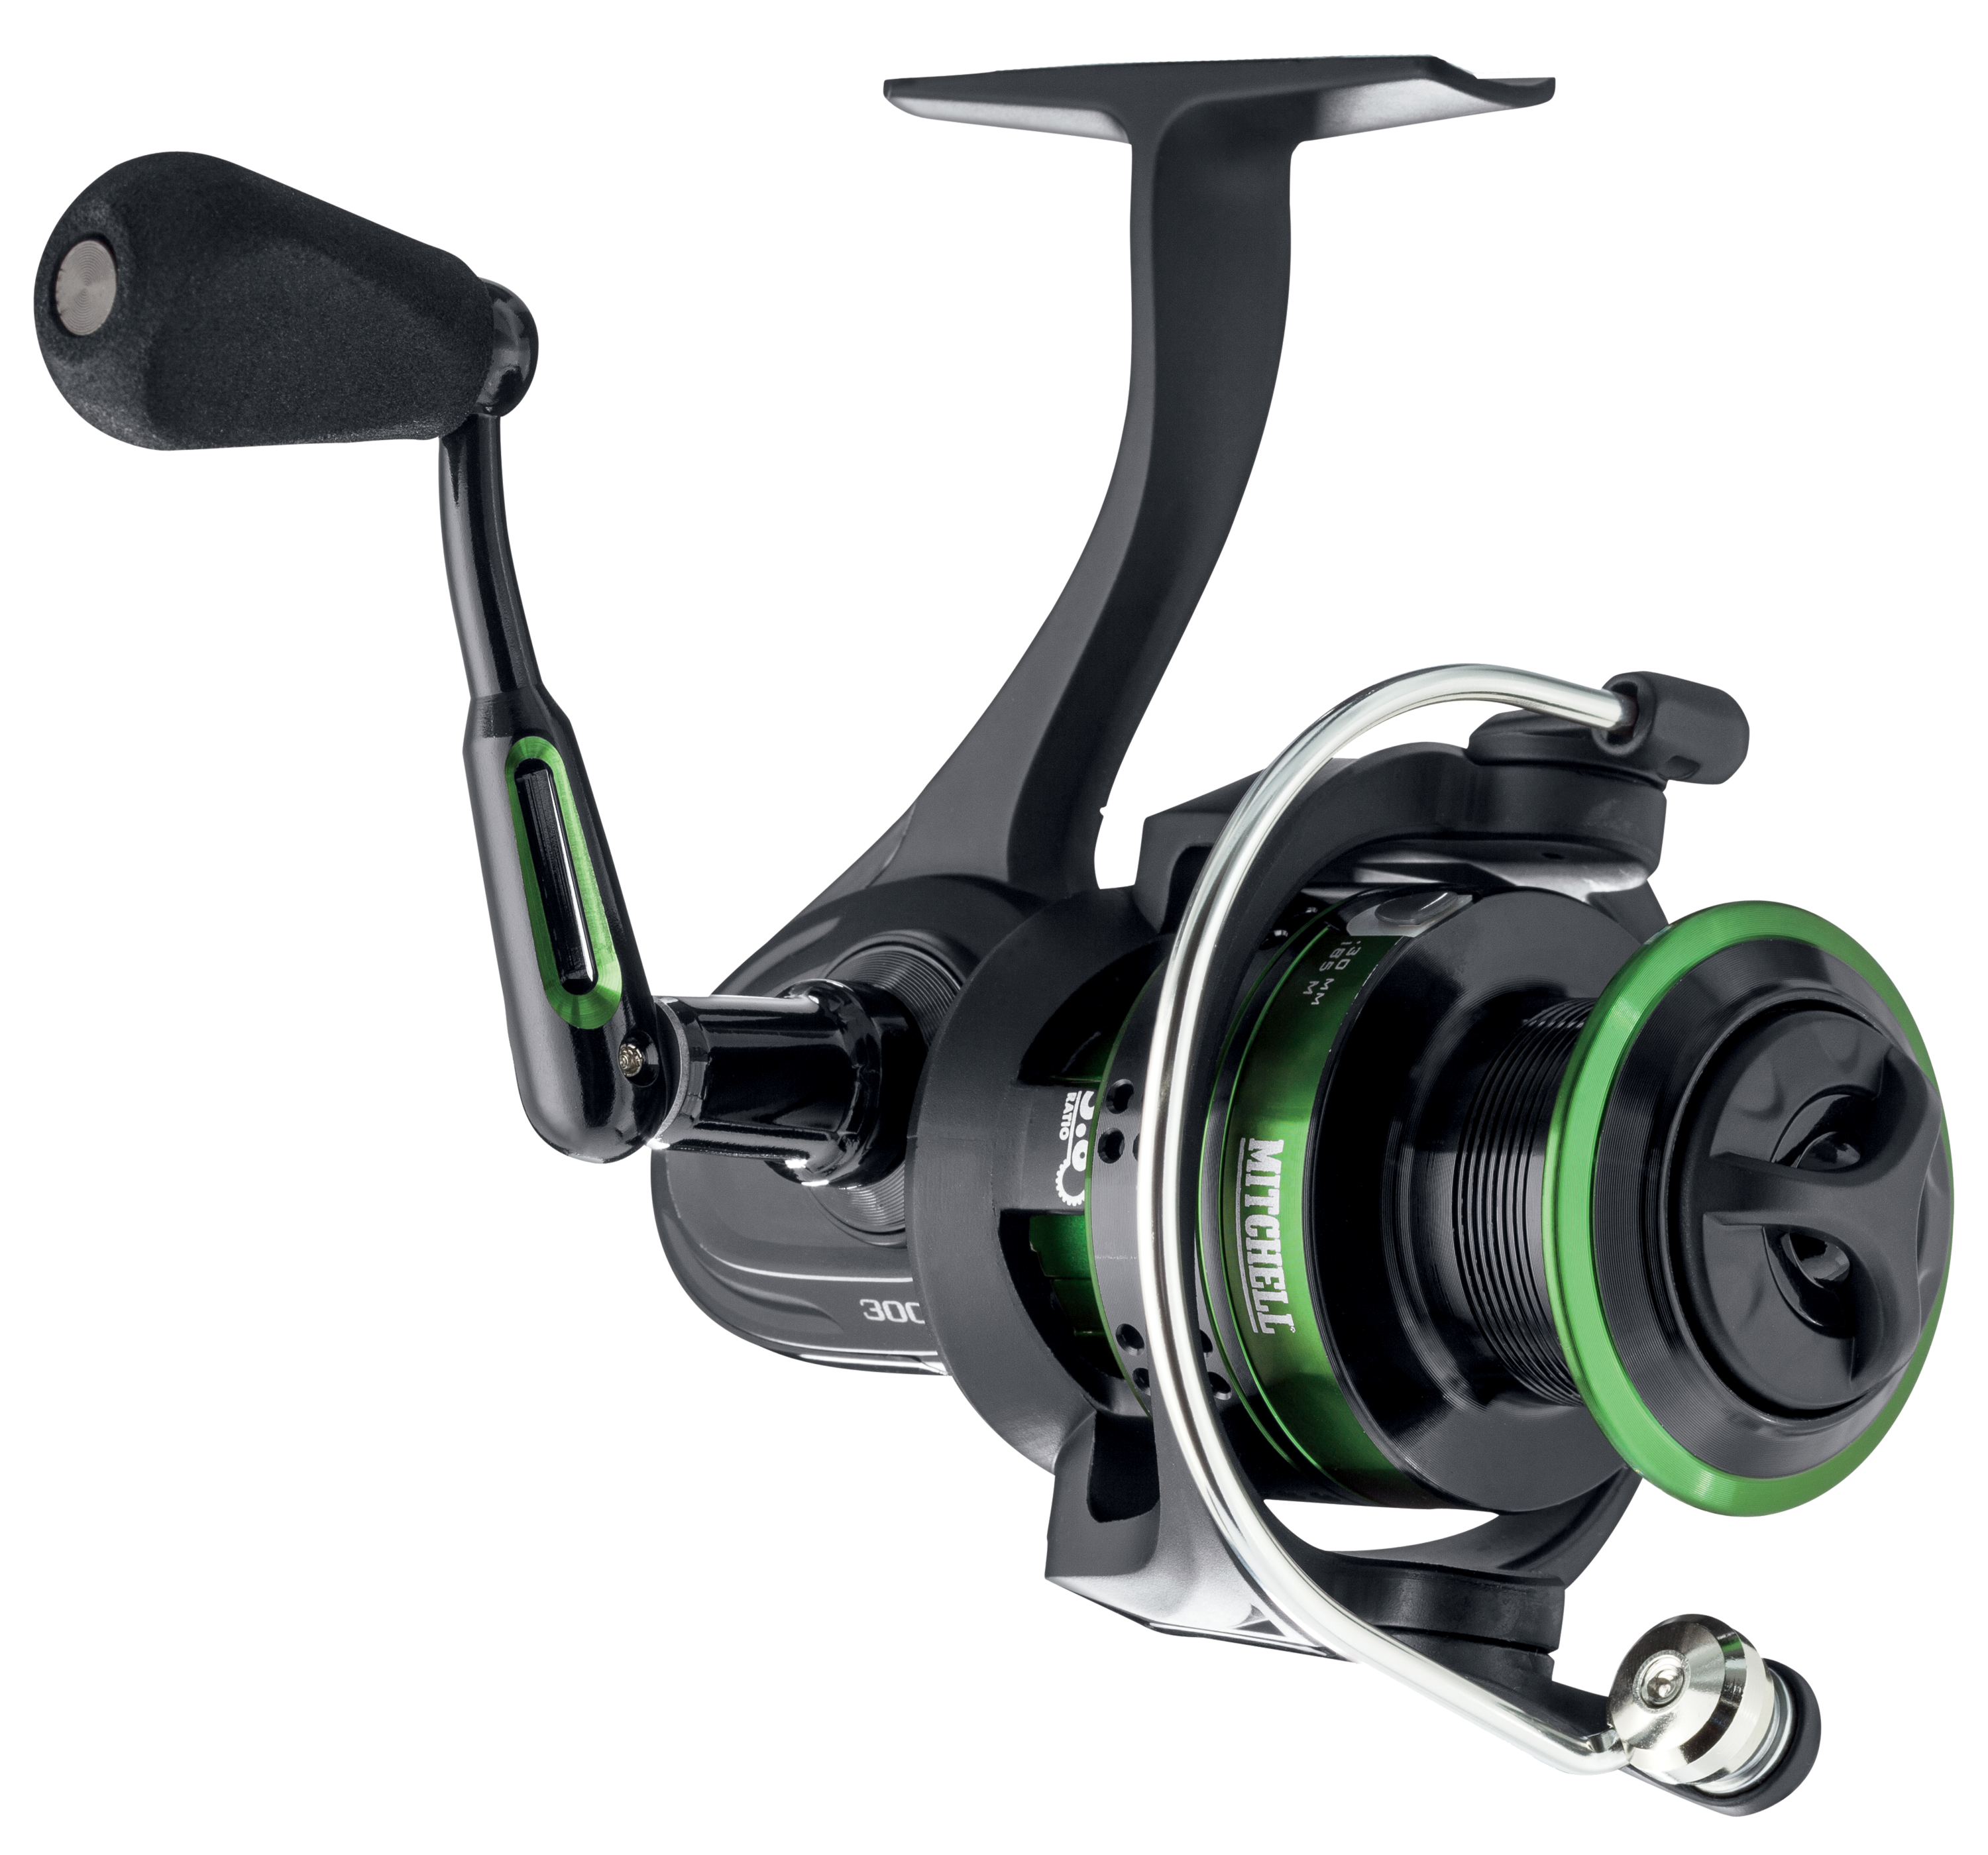 Mitchell 300 Pro Spinning Reel - Size 300